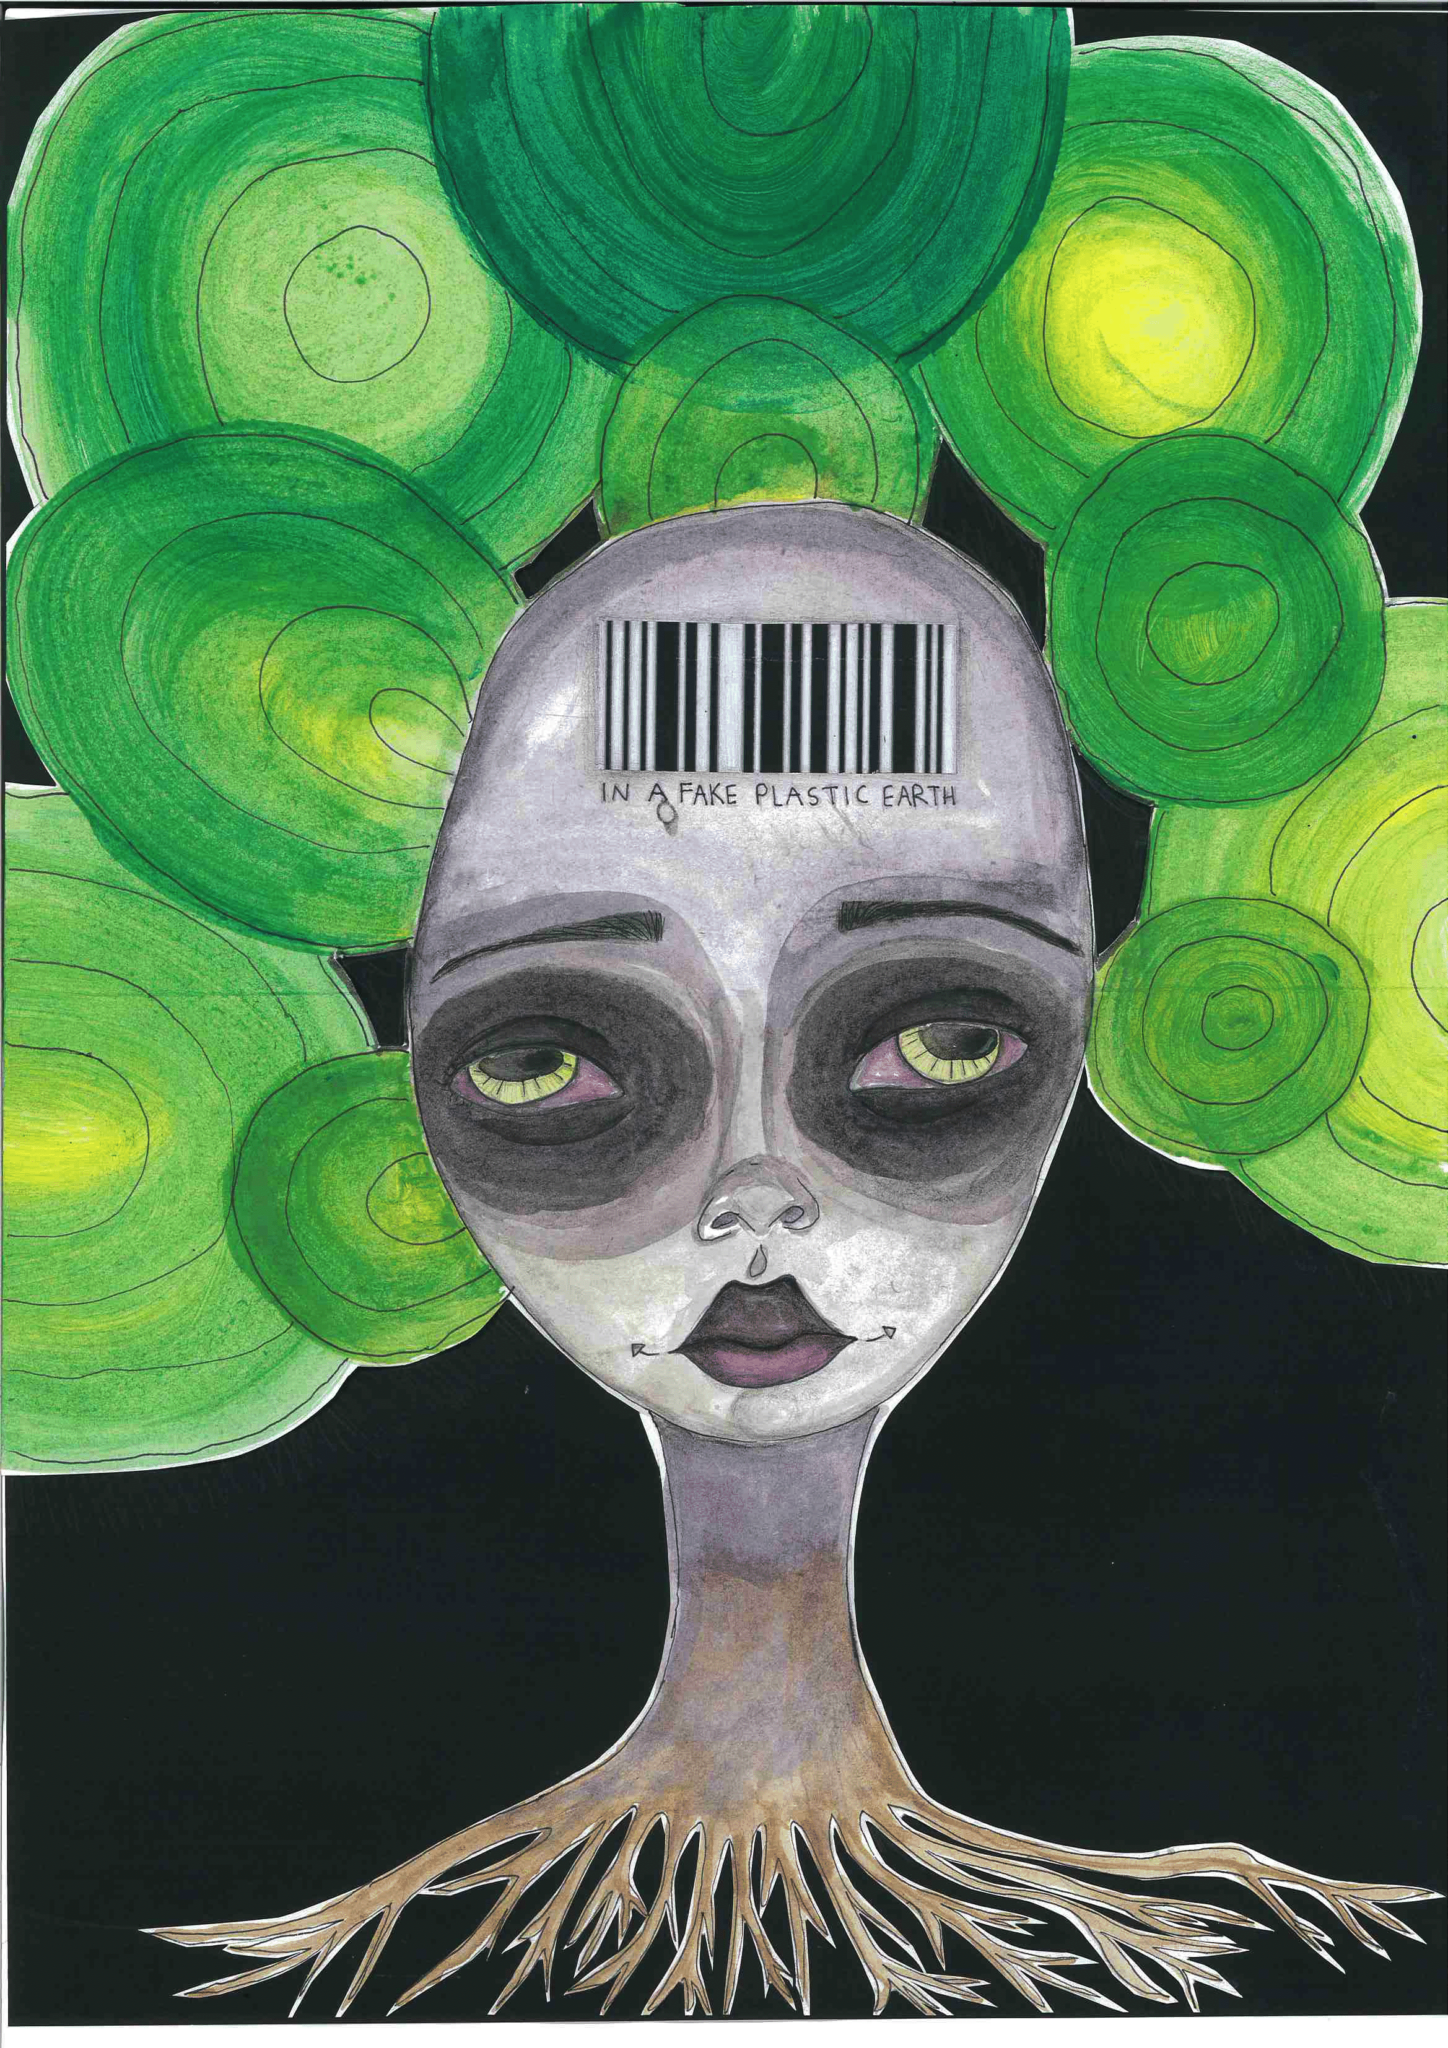 a grey and white face looks solemn, and is looking towards the sky. They have a long neck with roots at the bottom like a tree. Black background with green cirlces around the head, like clumps of hair or trees. On the faces forehead there is a barcode that says ' in a fake plastic world'